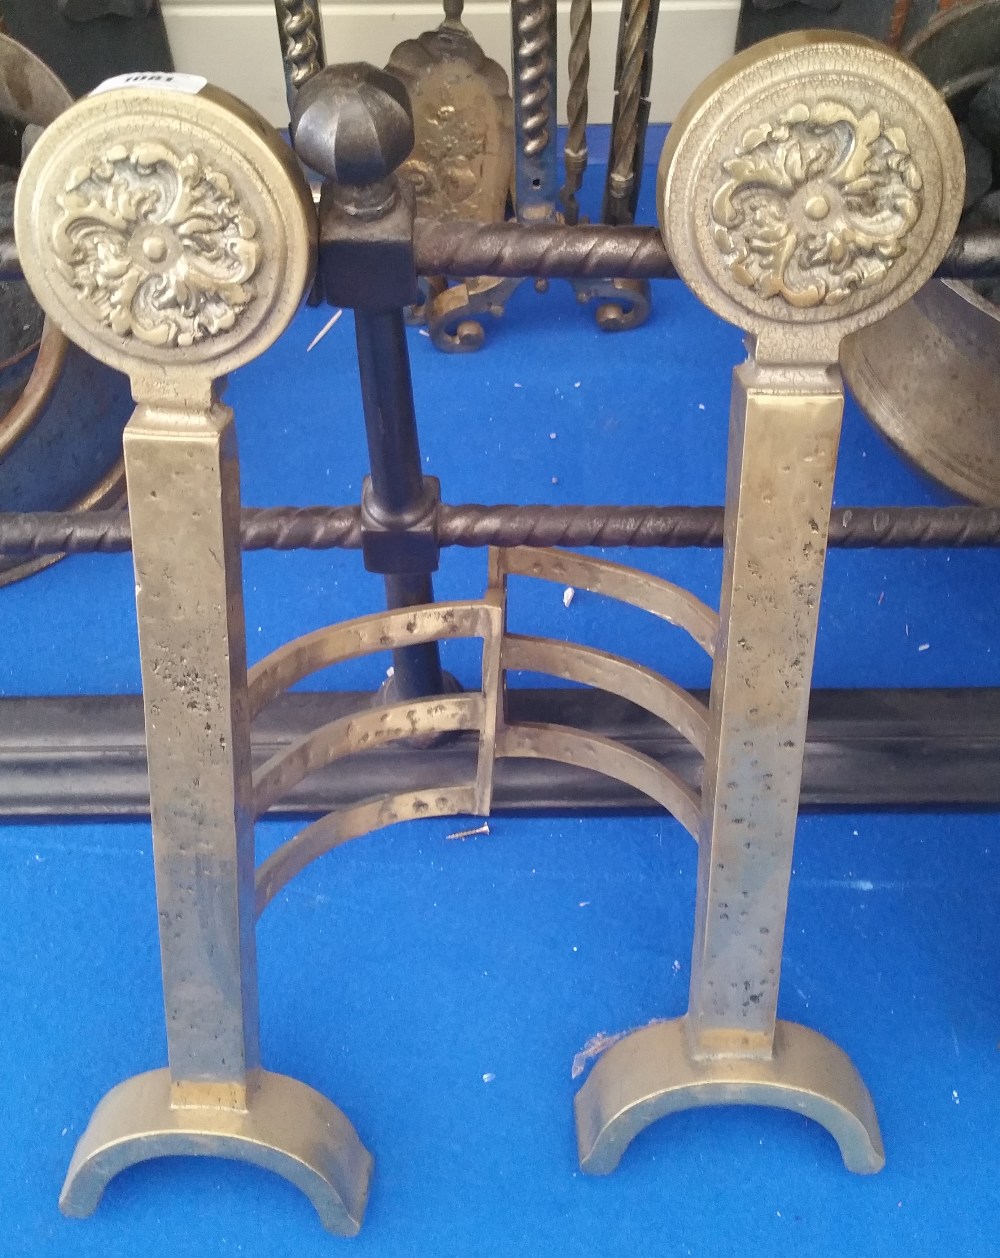 A GOOD PAIR OF BRASS FIRE SIDE ANDIRONS with decorative cut brass rosette roundels.